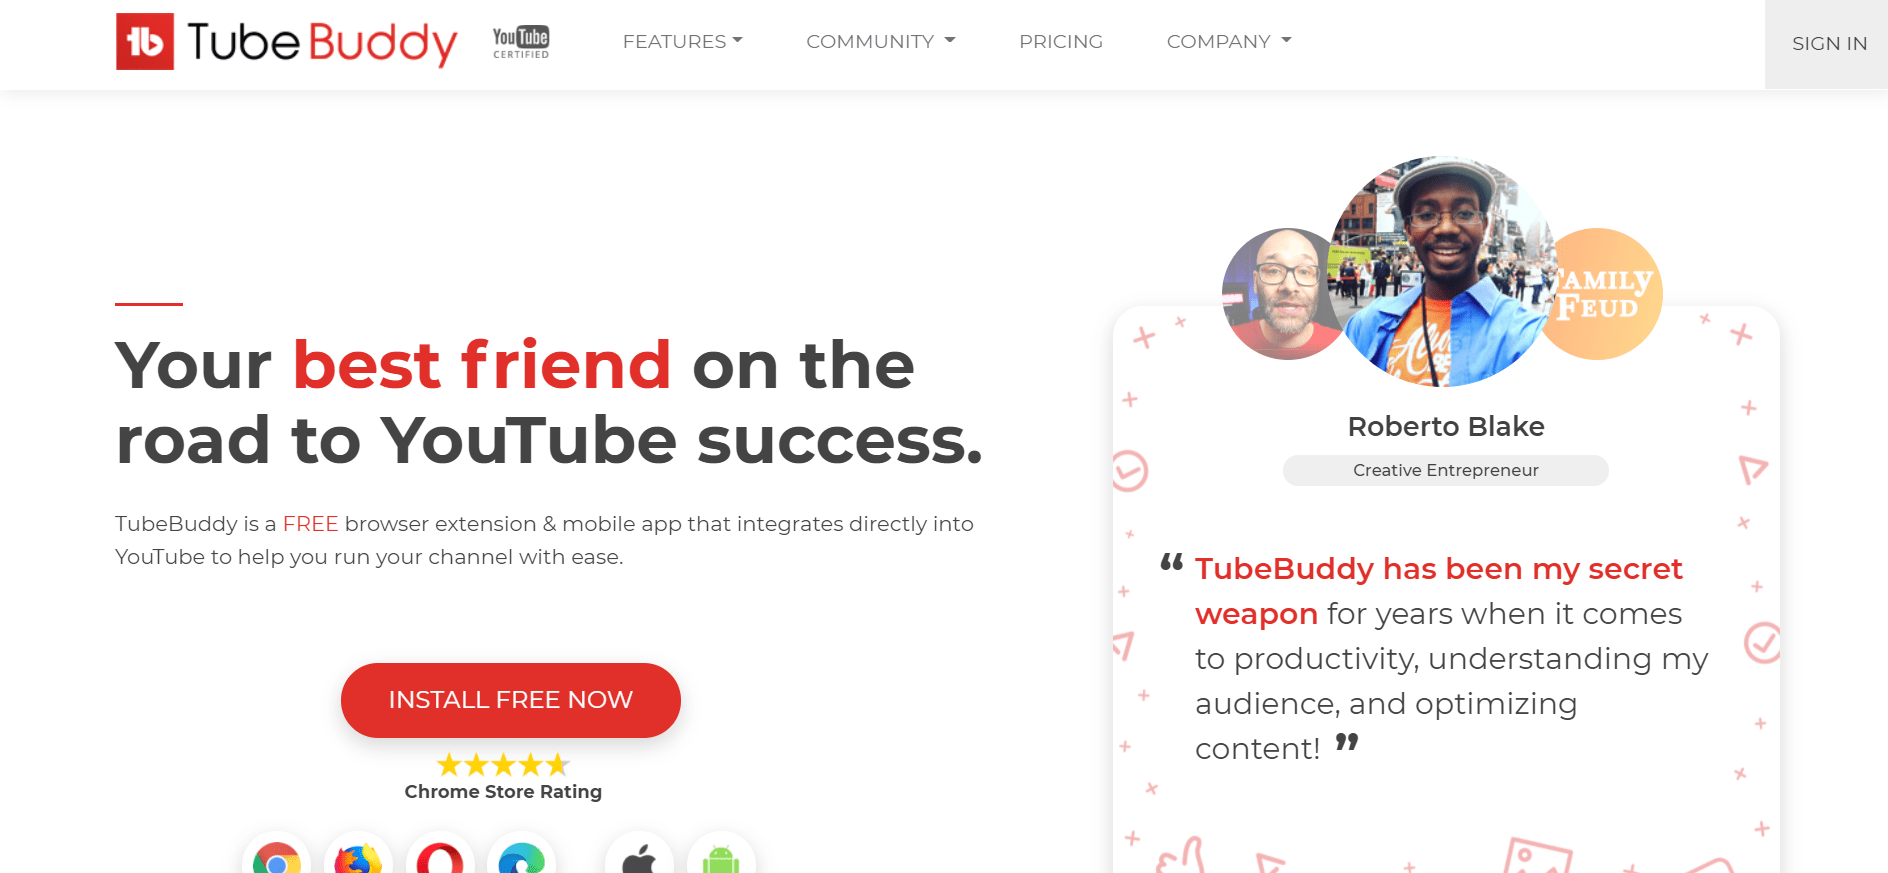 tubebuddy-overview-Recurring Affiliate Programs